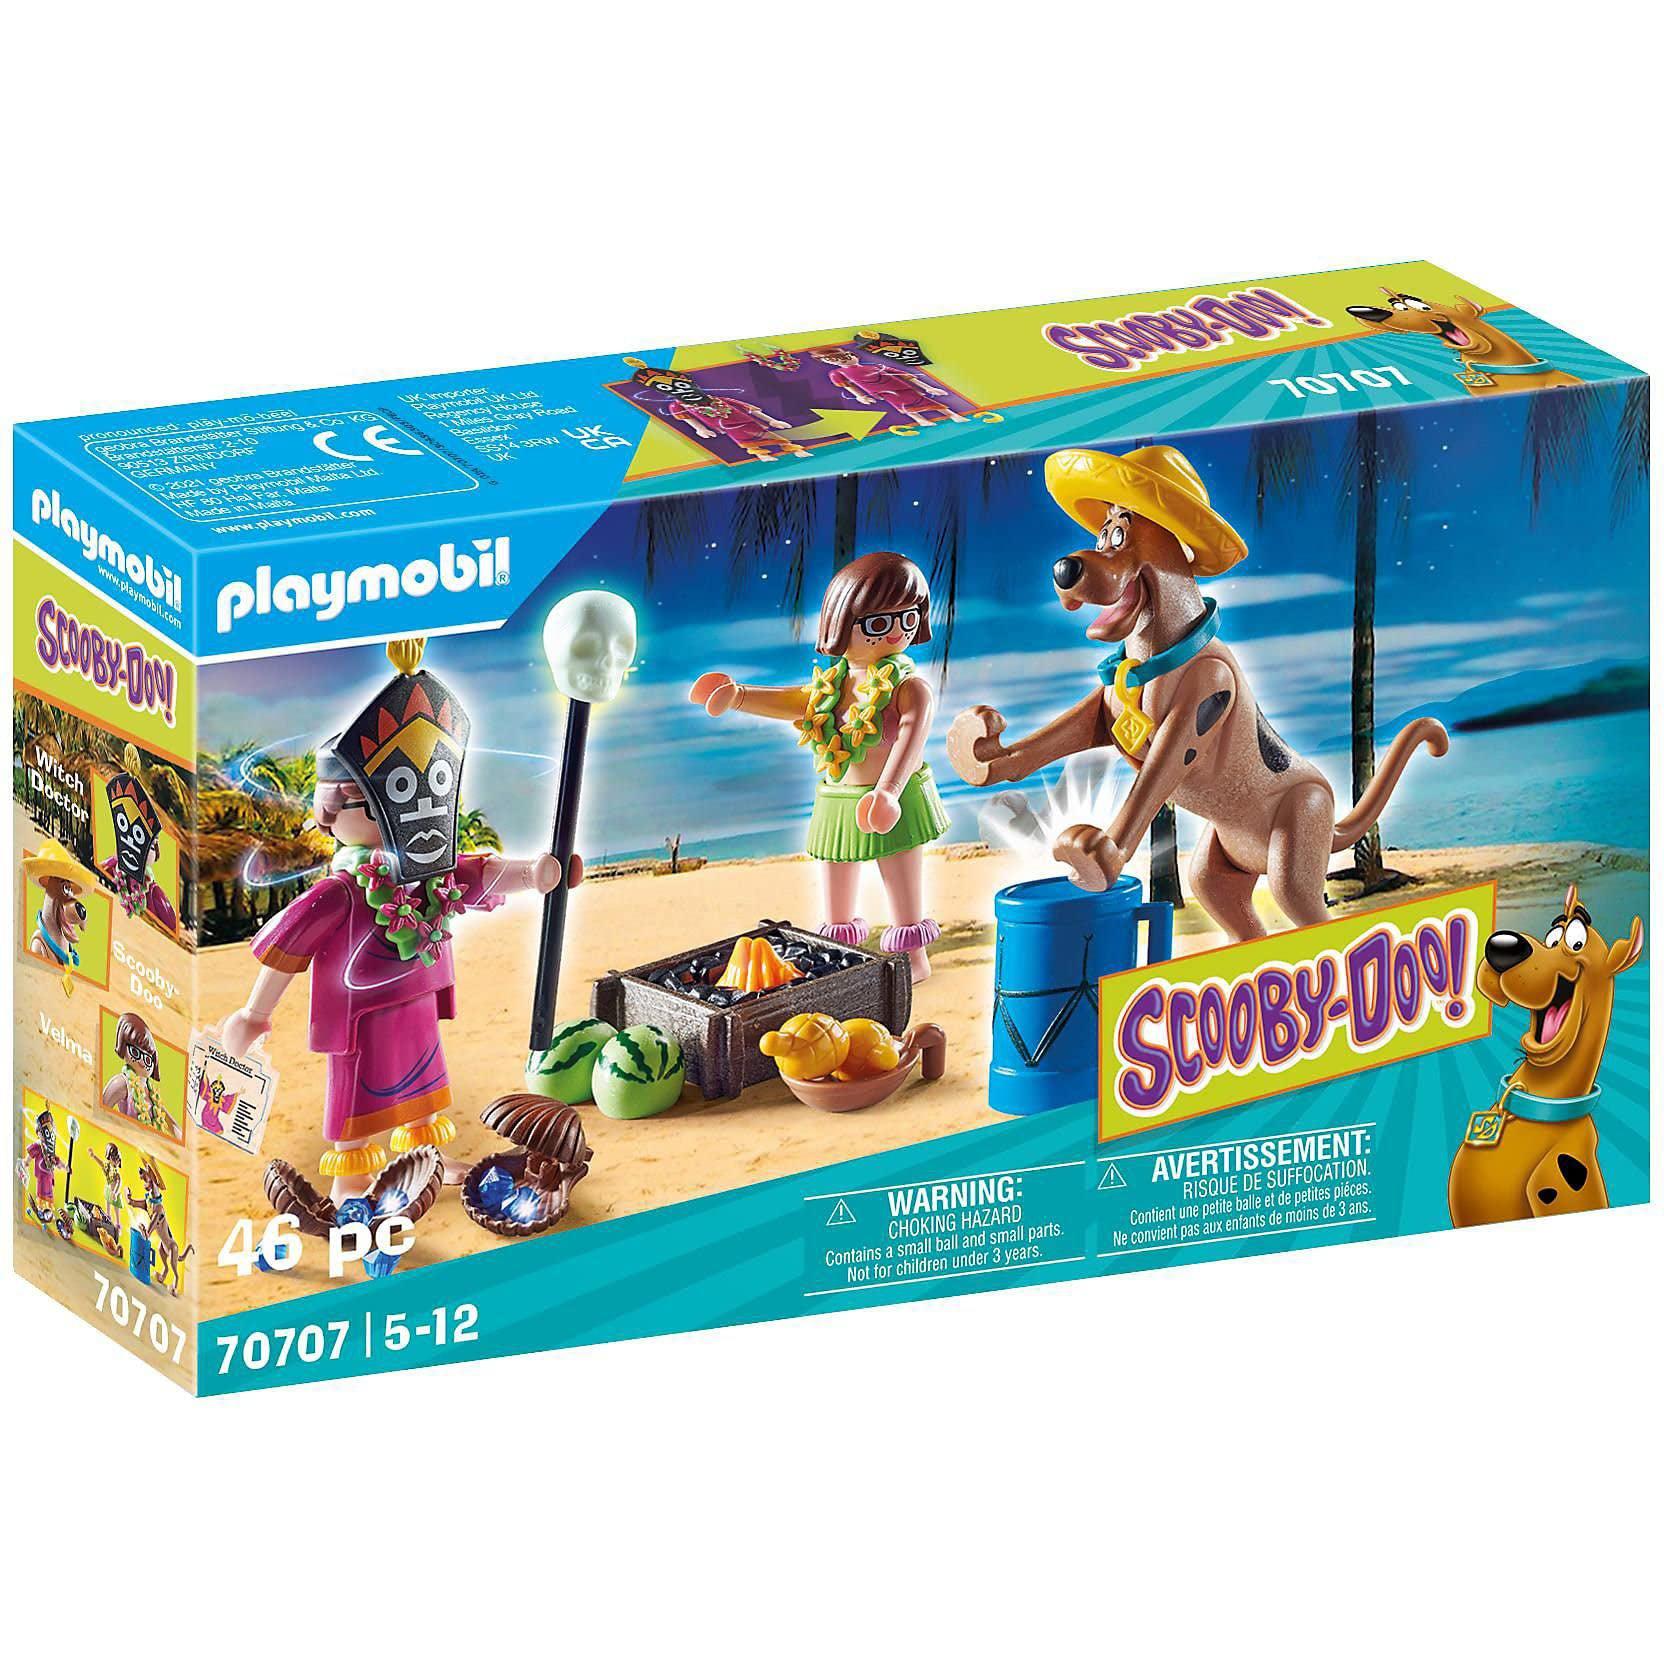 Playmobil-SCOOBY-DOO! Adventure with Witch Doctor-70707-Legacy Toys